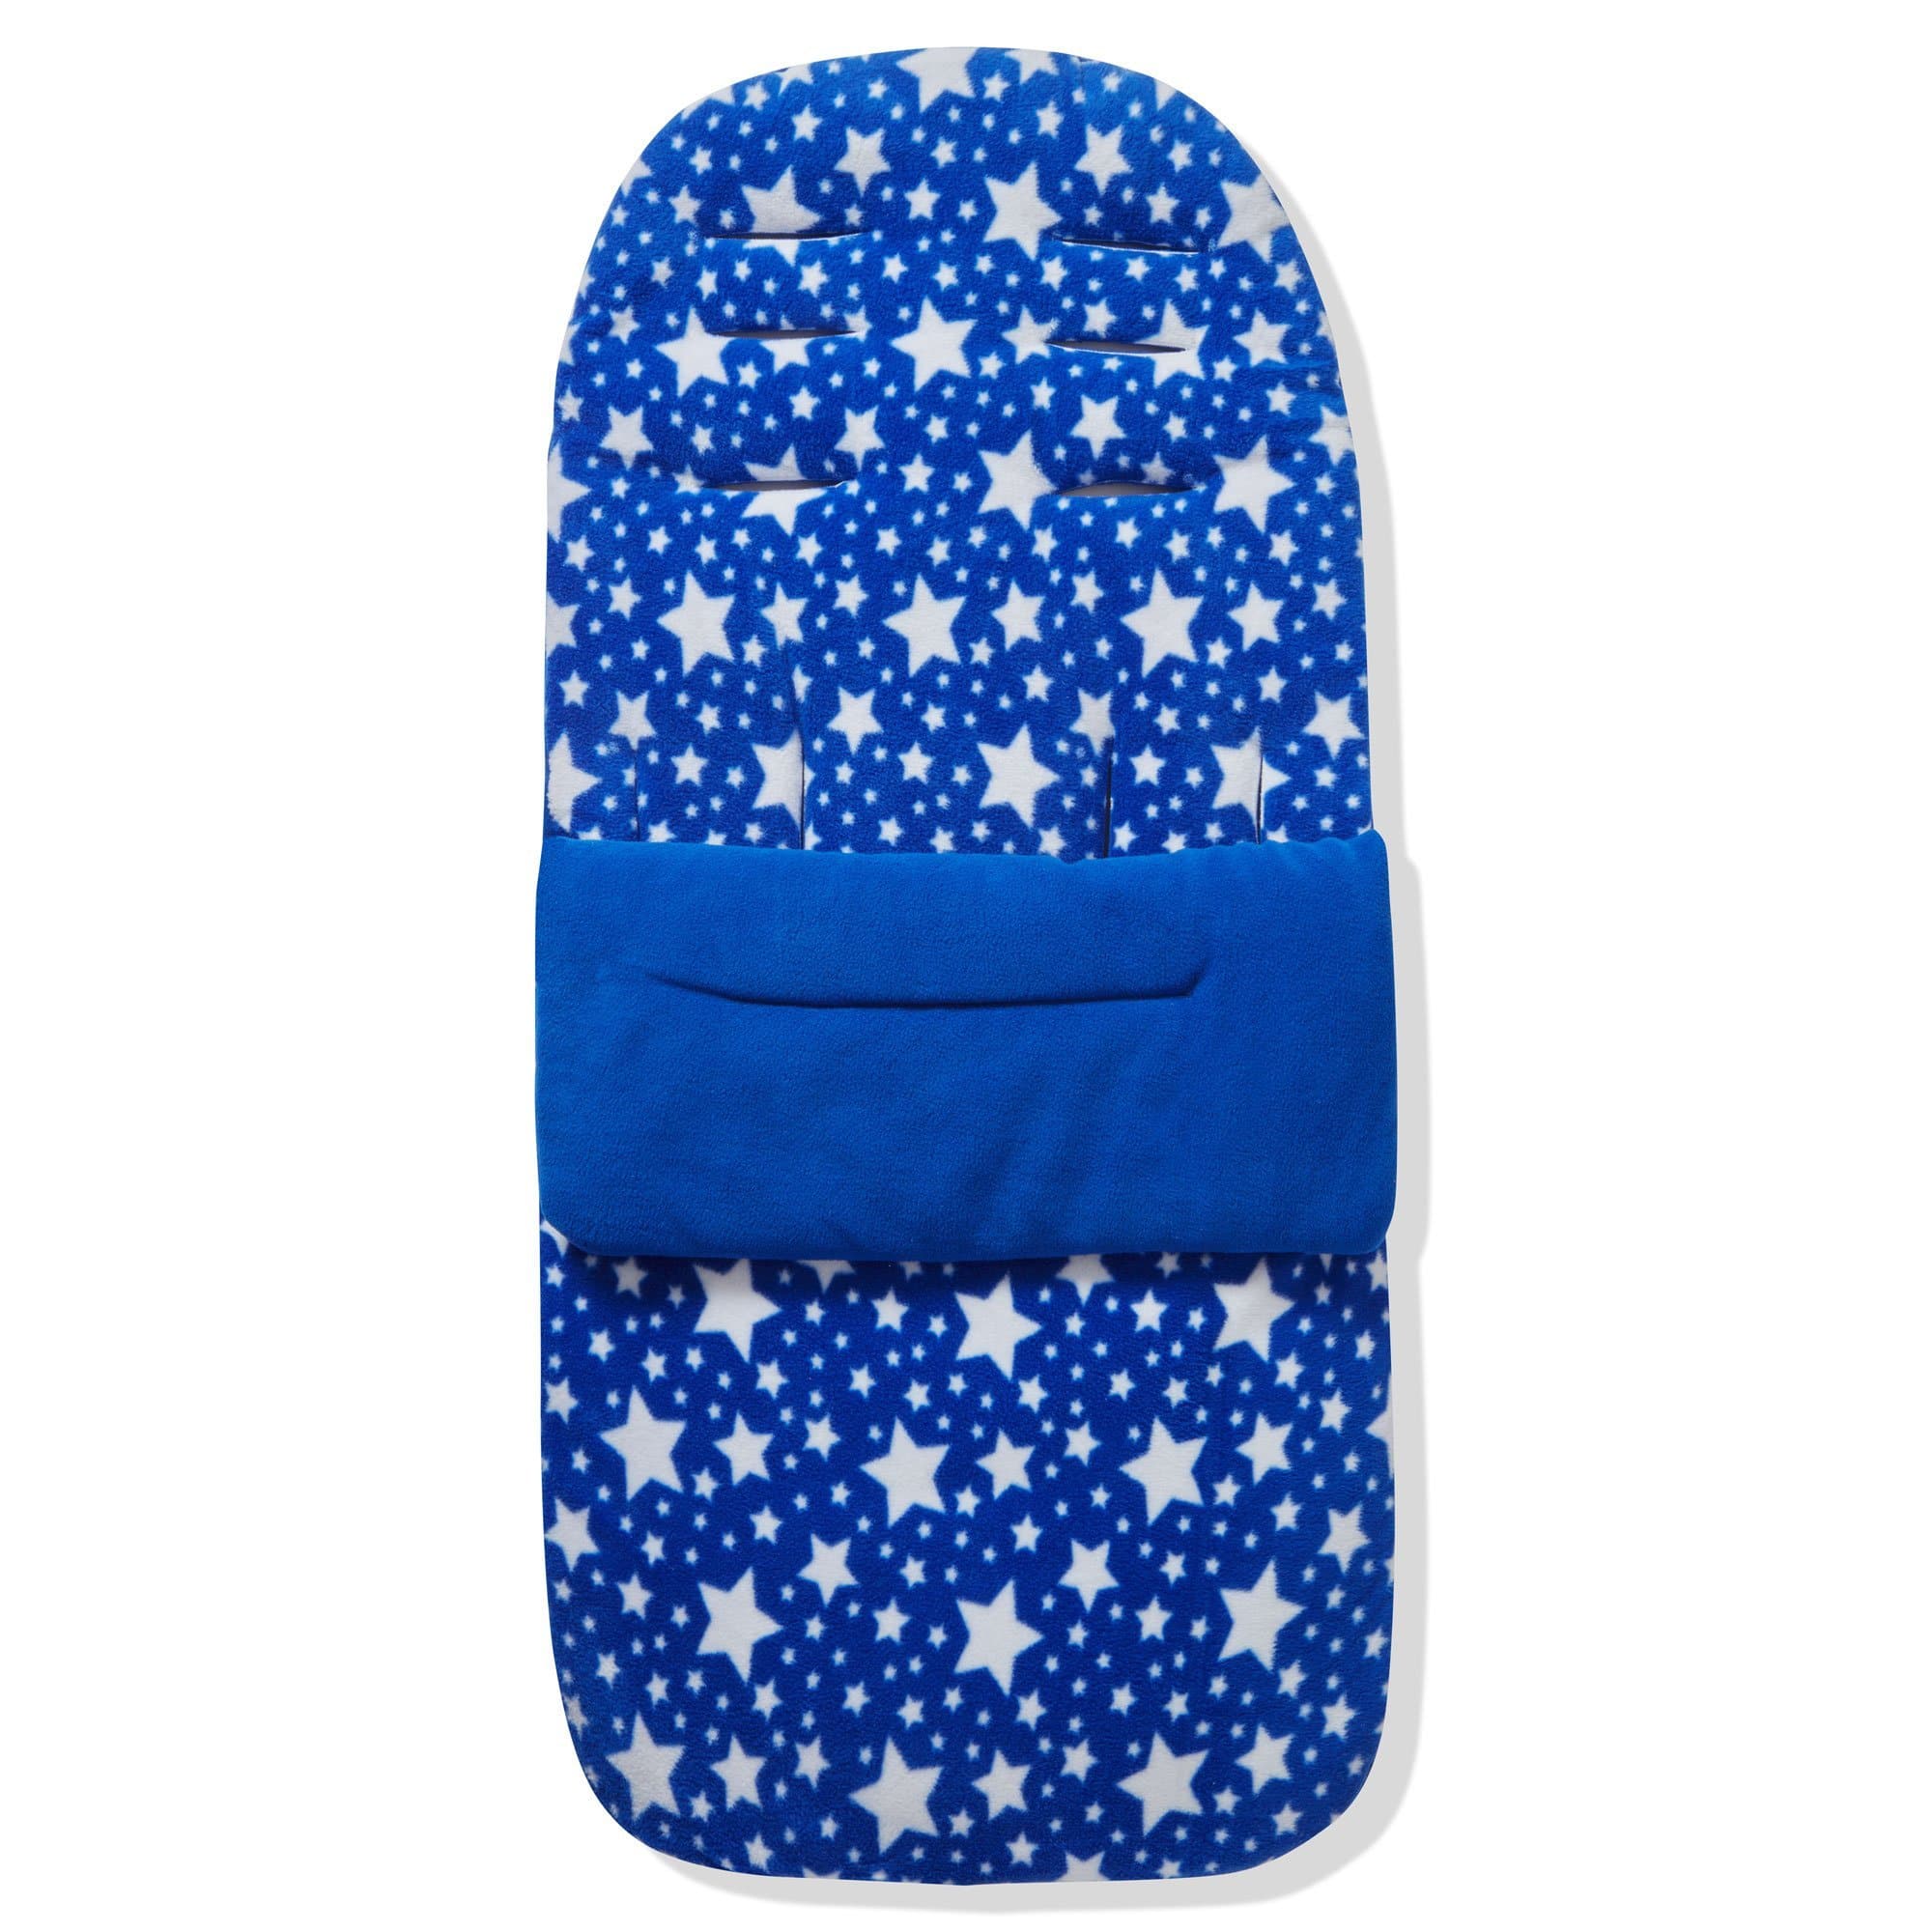 Fleece Footmuff / Cosy Toes Compatible With DoBuggy - Blue Star / Fits All Models | For Your Little One